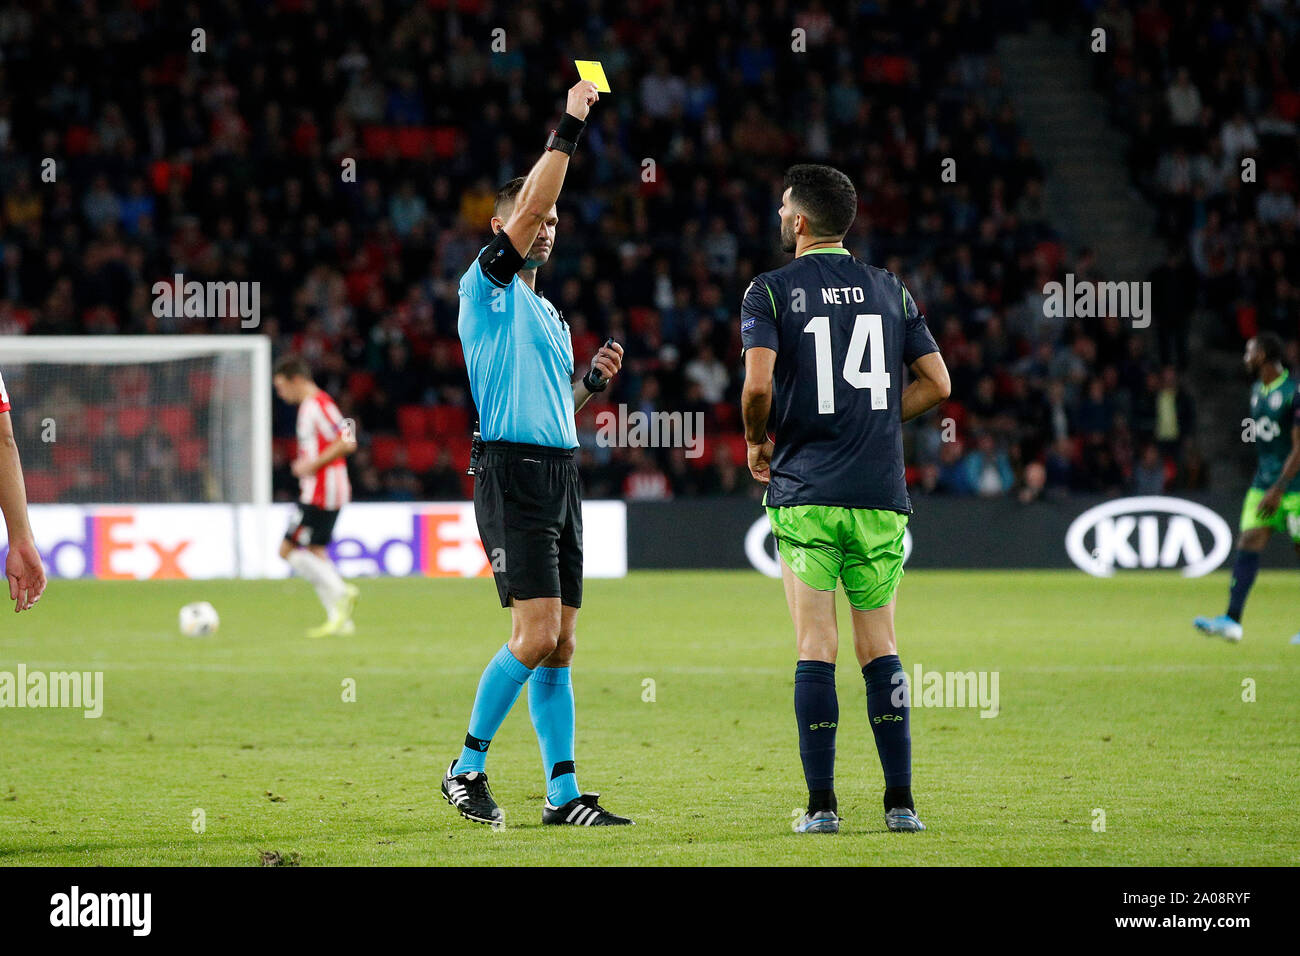 Eindhoven, Netherlands. 19th Sep, 2019. EINDHOVEN, PSV - Sporting Clube de Portugal SCP, 19-09-2019, football, season 2019-2020, Europa League Group Stage, Philips Stadium, referee Ivan Kruzliak and Sporting CP player Luis Neto Credit: Pro Shots/Alamy Live News Stock Photo